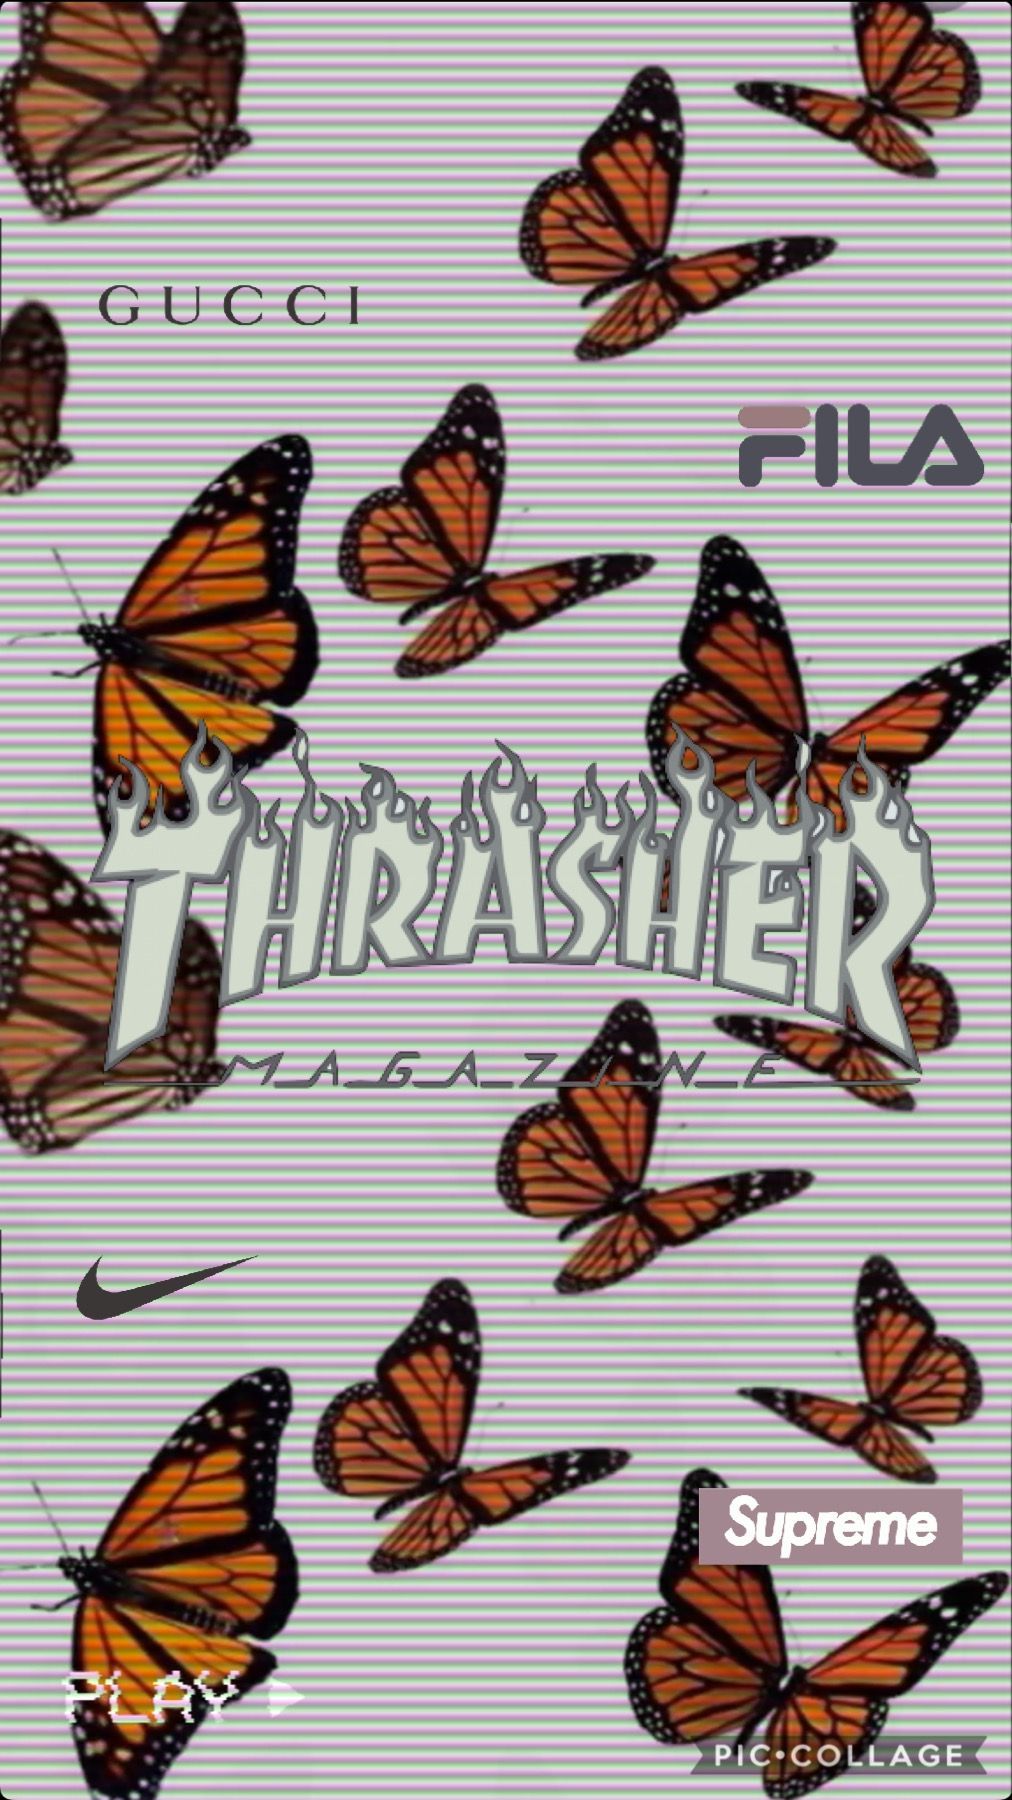 Aesthetic butterfly wallpaper with gucci, fila, supreme, nike, and thrasher logo - Thrasher